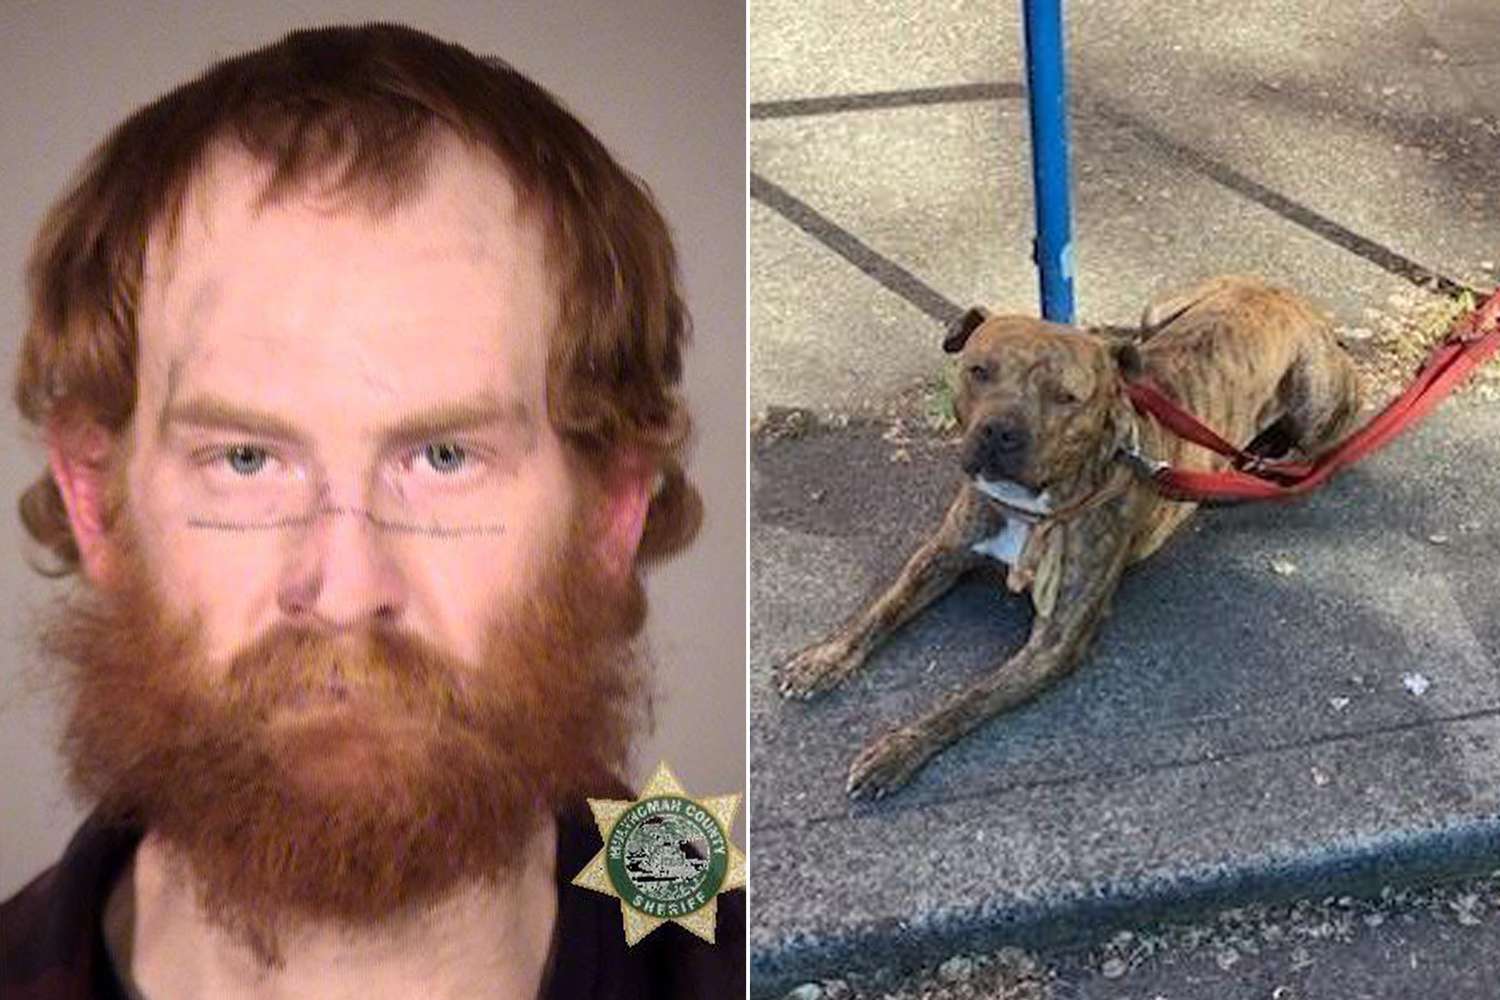 White Man Allegedly Sicced His Pit Bull on Black Security Guard After Hurling Racial Slur